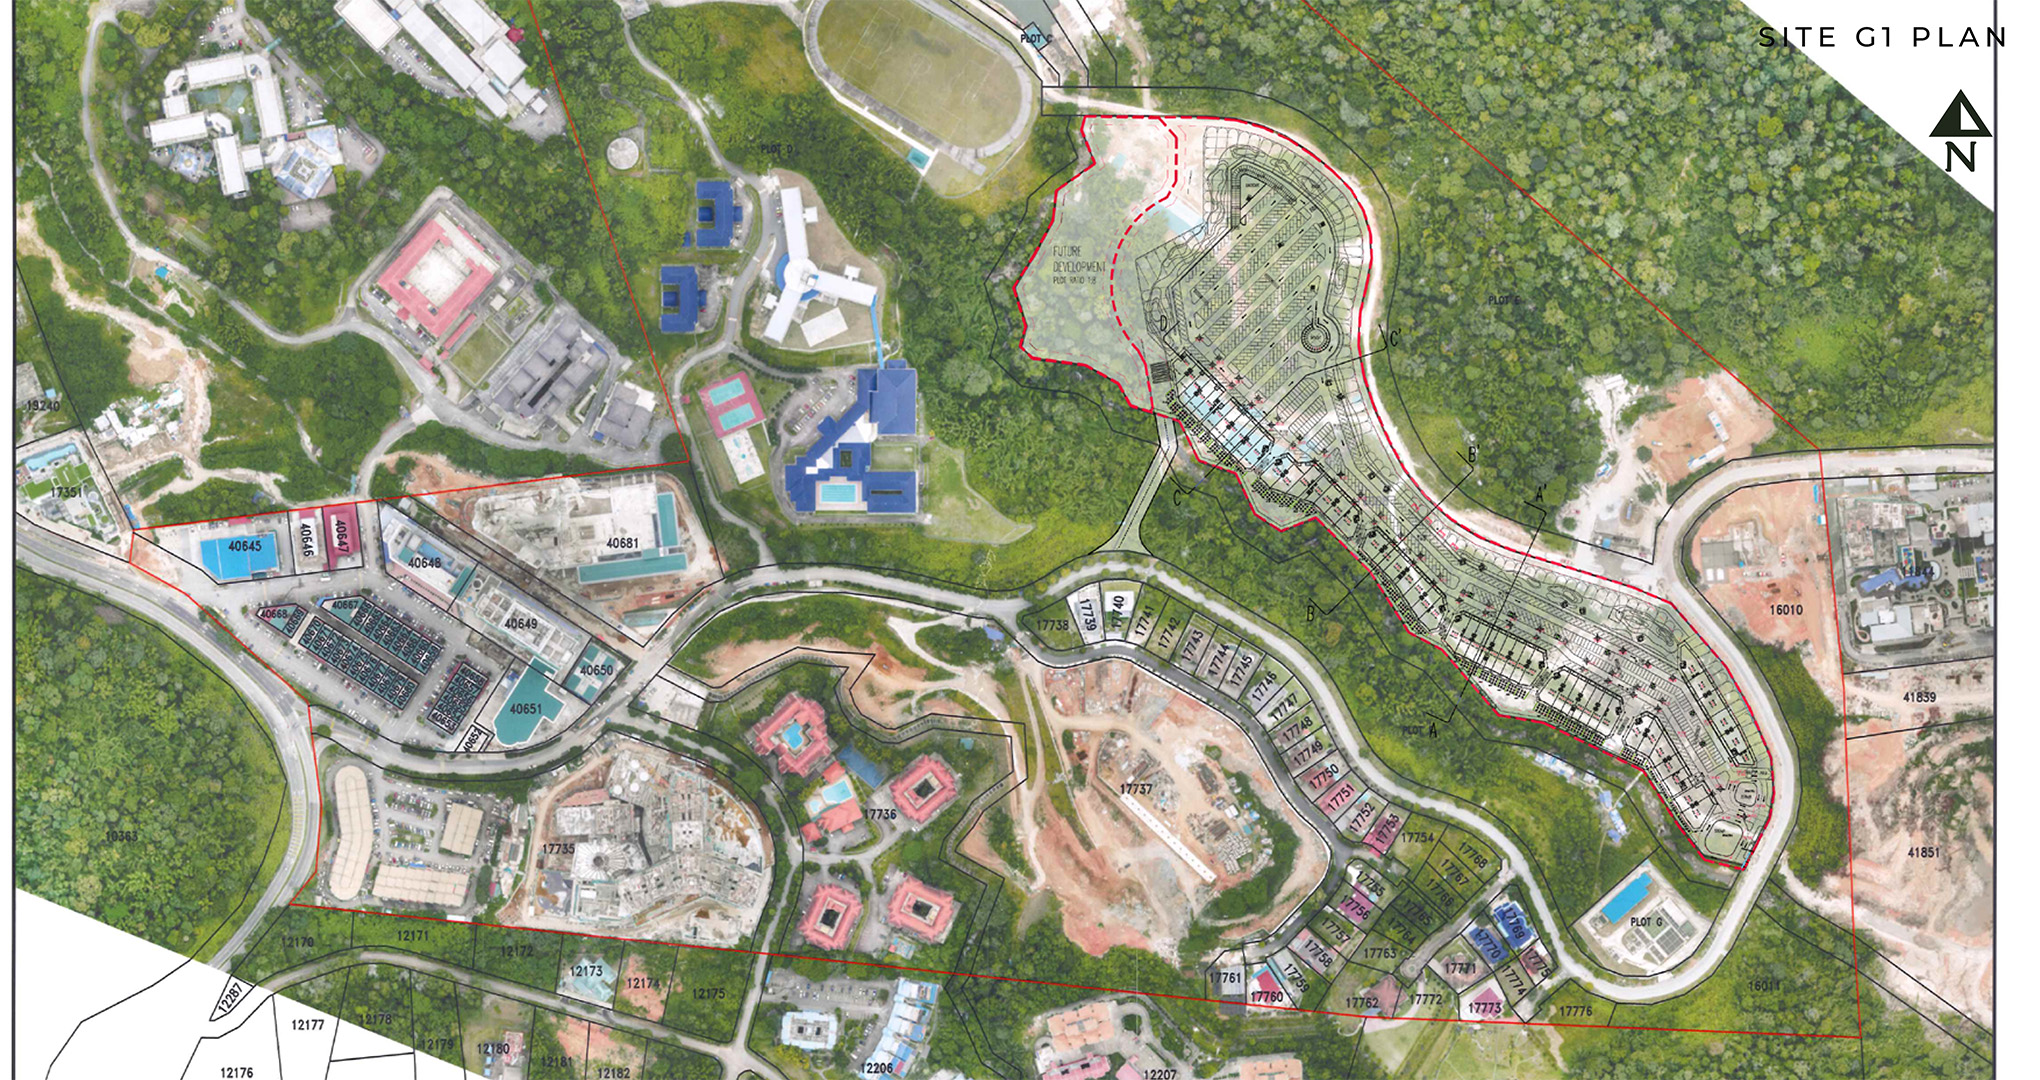 King's Park, Genting Highlands's newest entertainment hub to